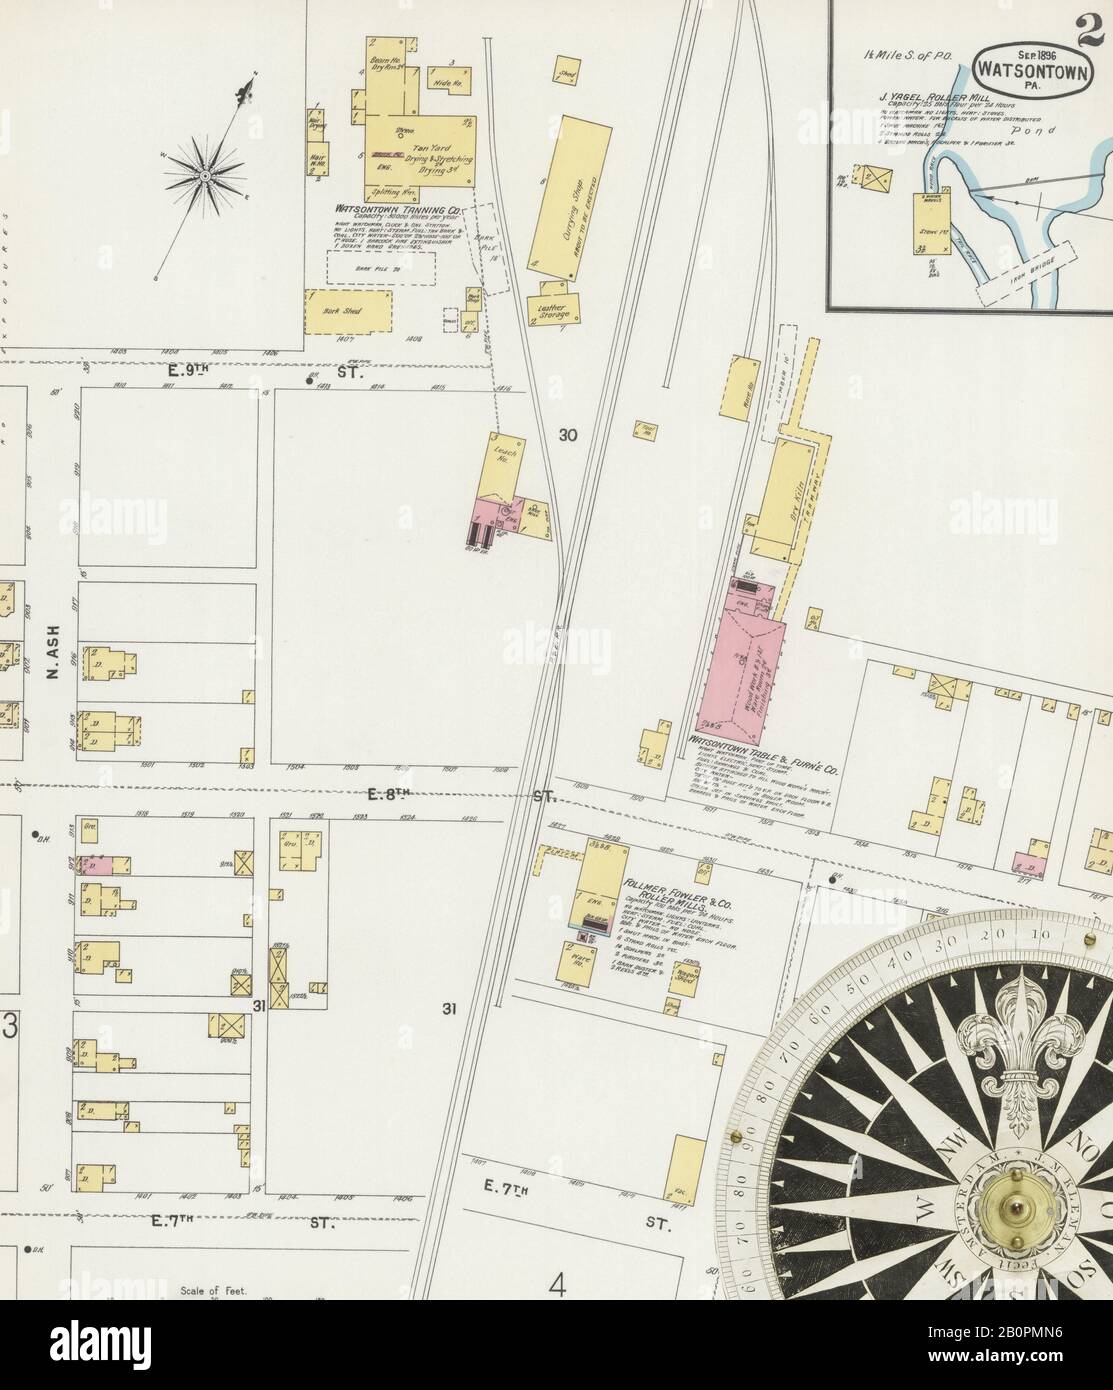 Image 2 of Sanborn Fire Insurance Map from Watsontown, Northumberland County, Pennsylvania. Sep 1896. 6 Sheet(s), America, street map with a Nineteenth Century compass Stock Photo